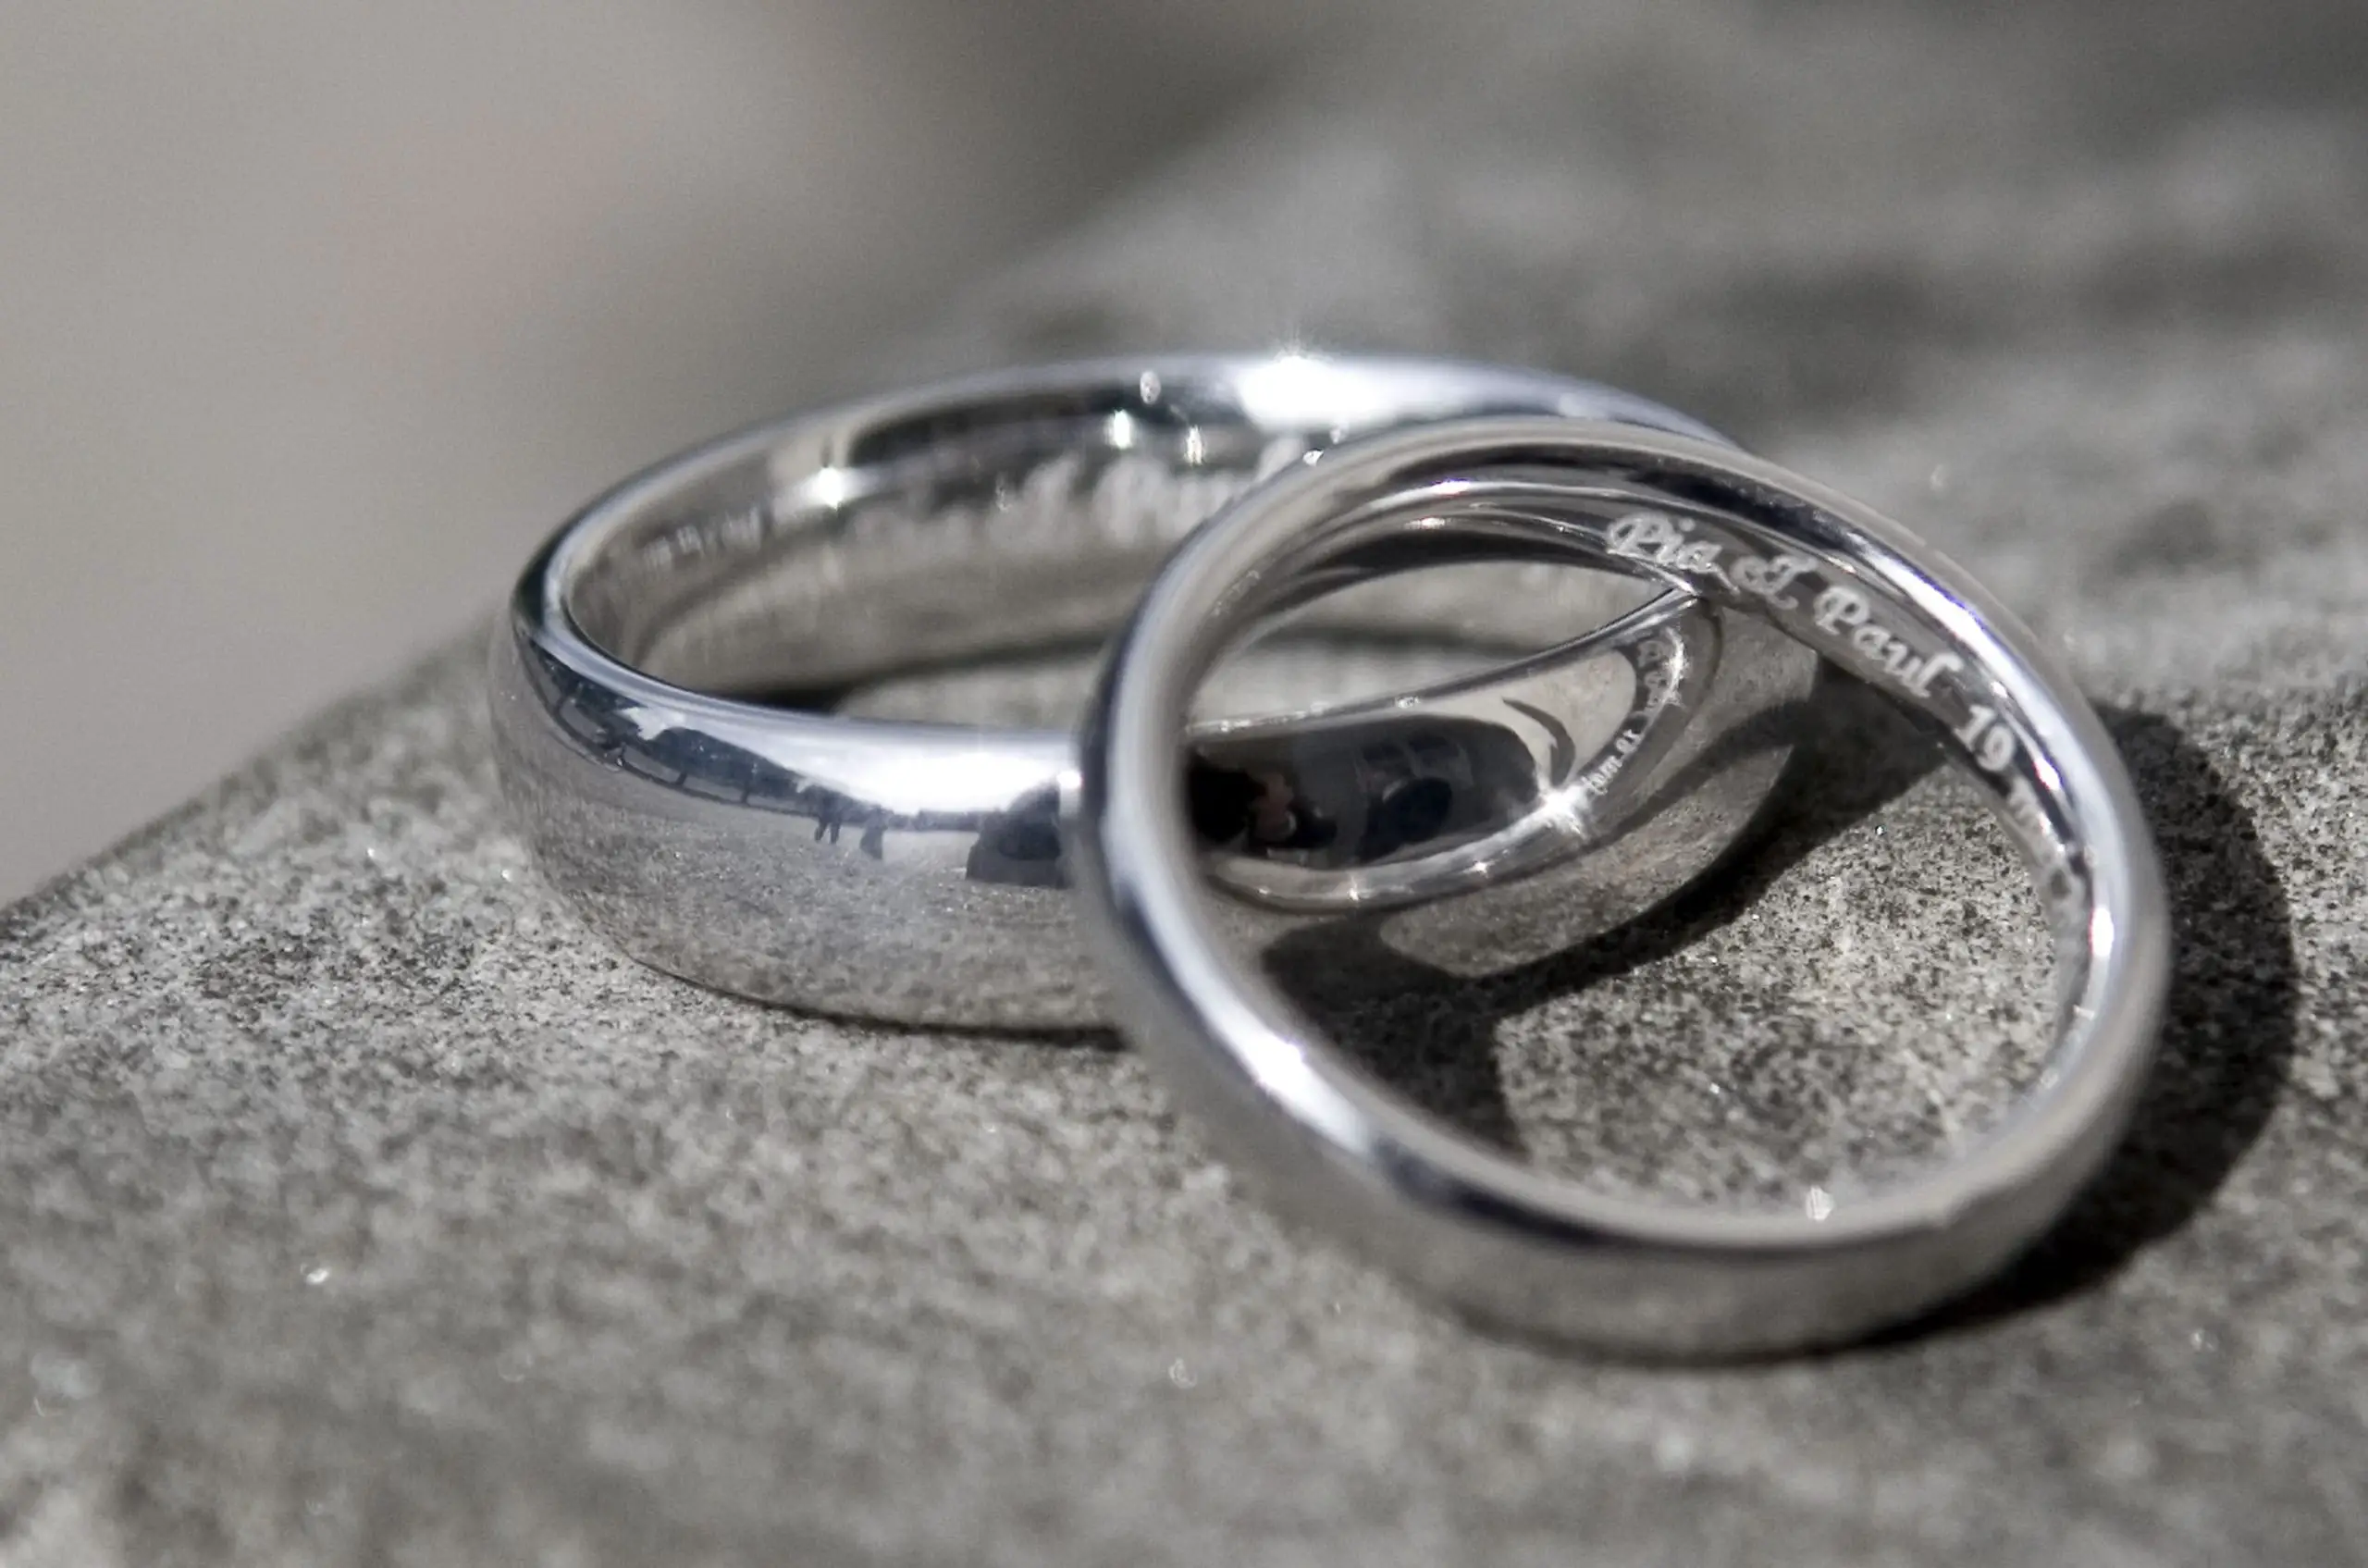 How to Engrave Your Wedding Rings